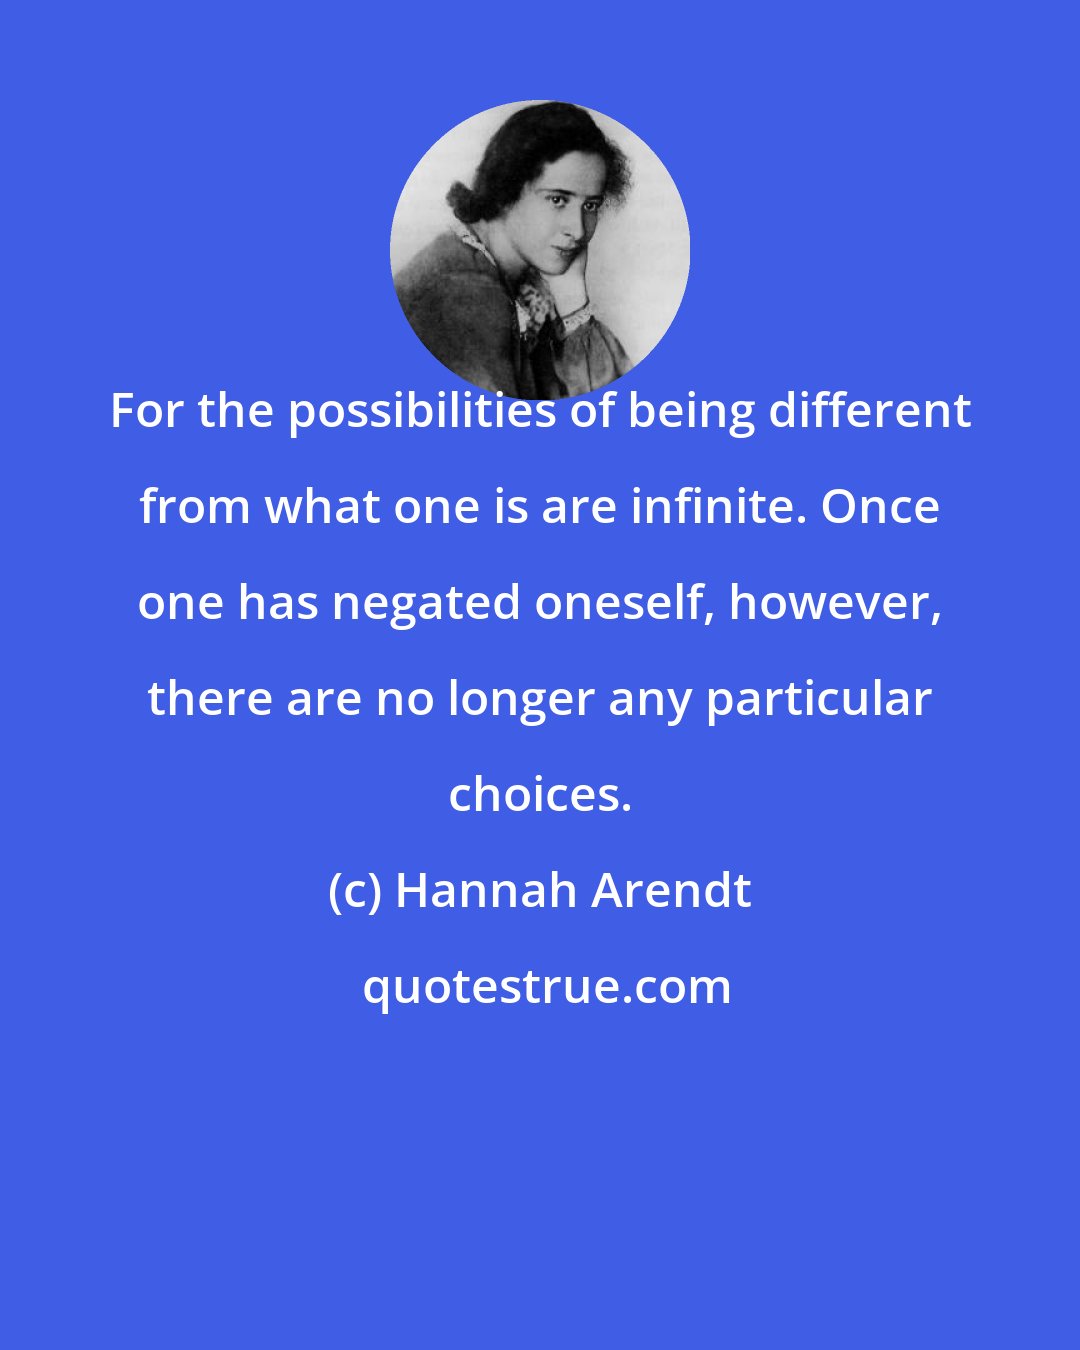 Hannah Arendt: For the possibilities of being different from what one is are infinite. Once one has negated oneself, however, there are no longer any particular choices.